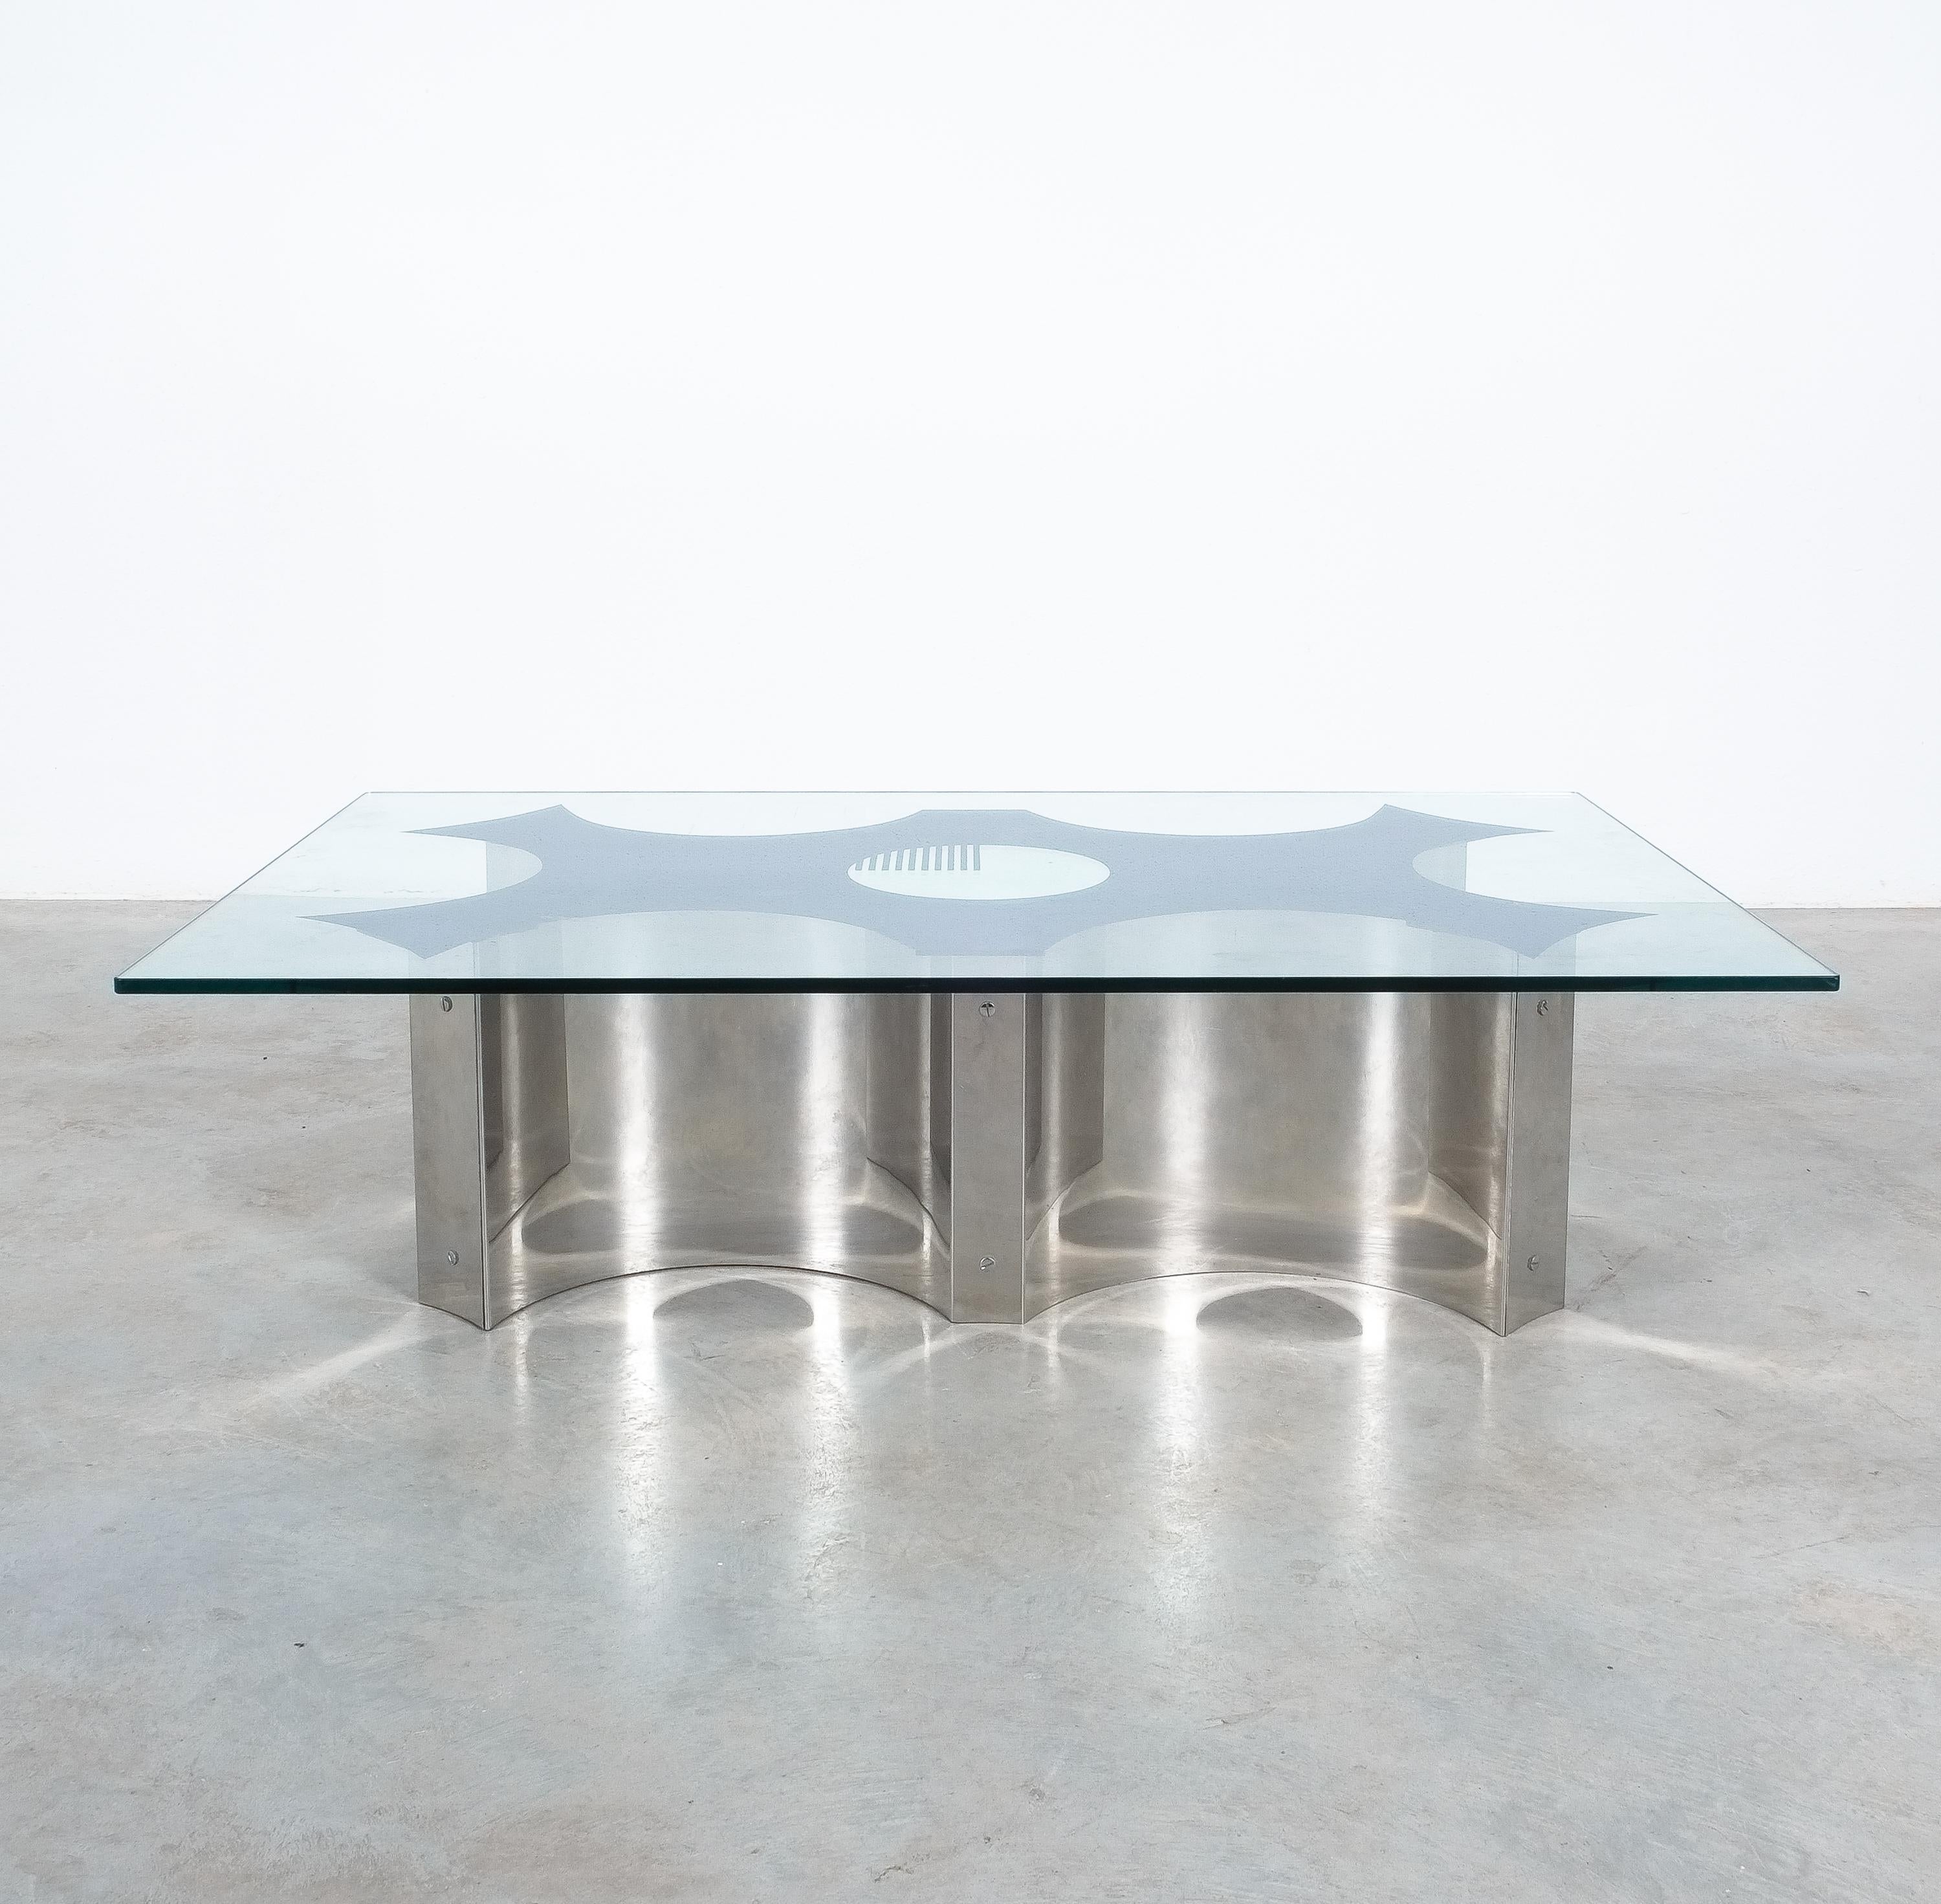 Unique coffee table by Eugenio Davico with the original pattern mirror glass top, Italy 1970

Very cool and rare cocktail table with a heavy glass top on a bent stainless steel base. The glass has got a mirror back face depicting the outlining of